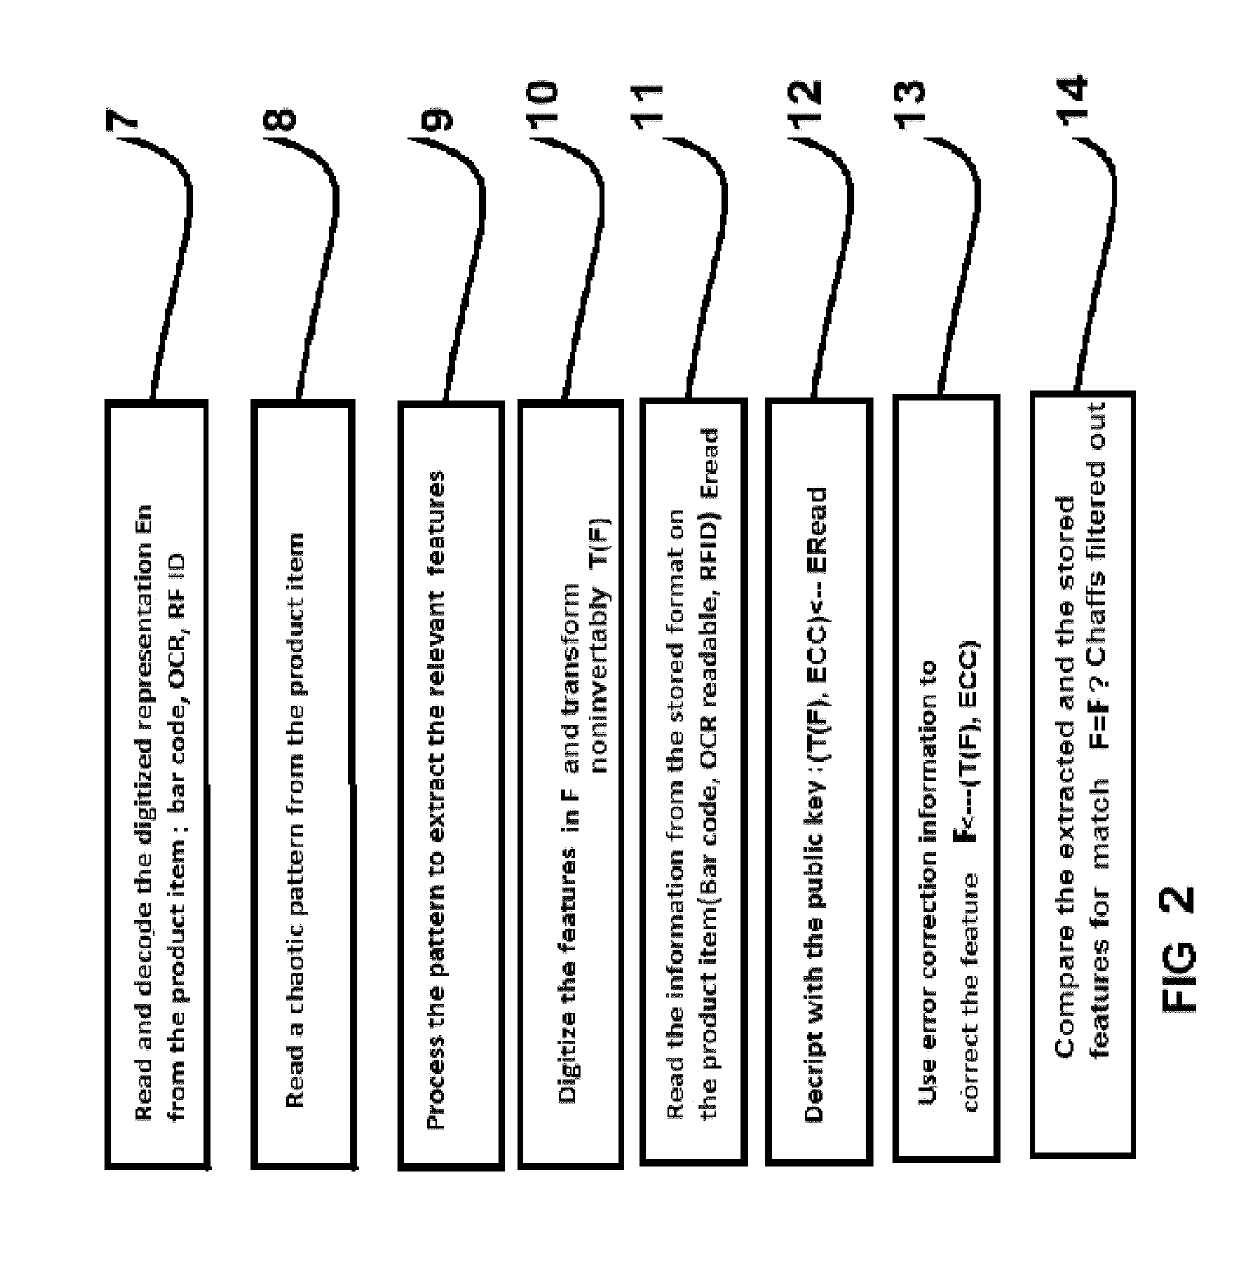 Method and apparatus for chaosmetric brand protection with fluorescent taggant